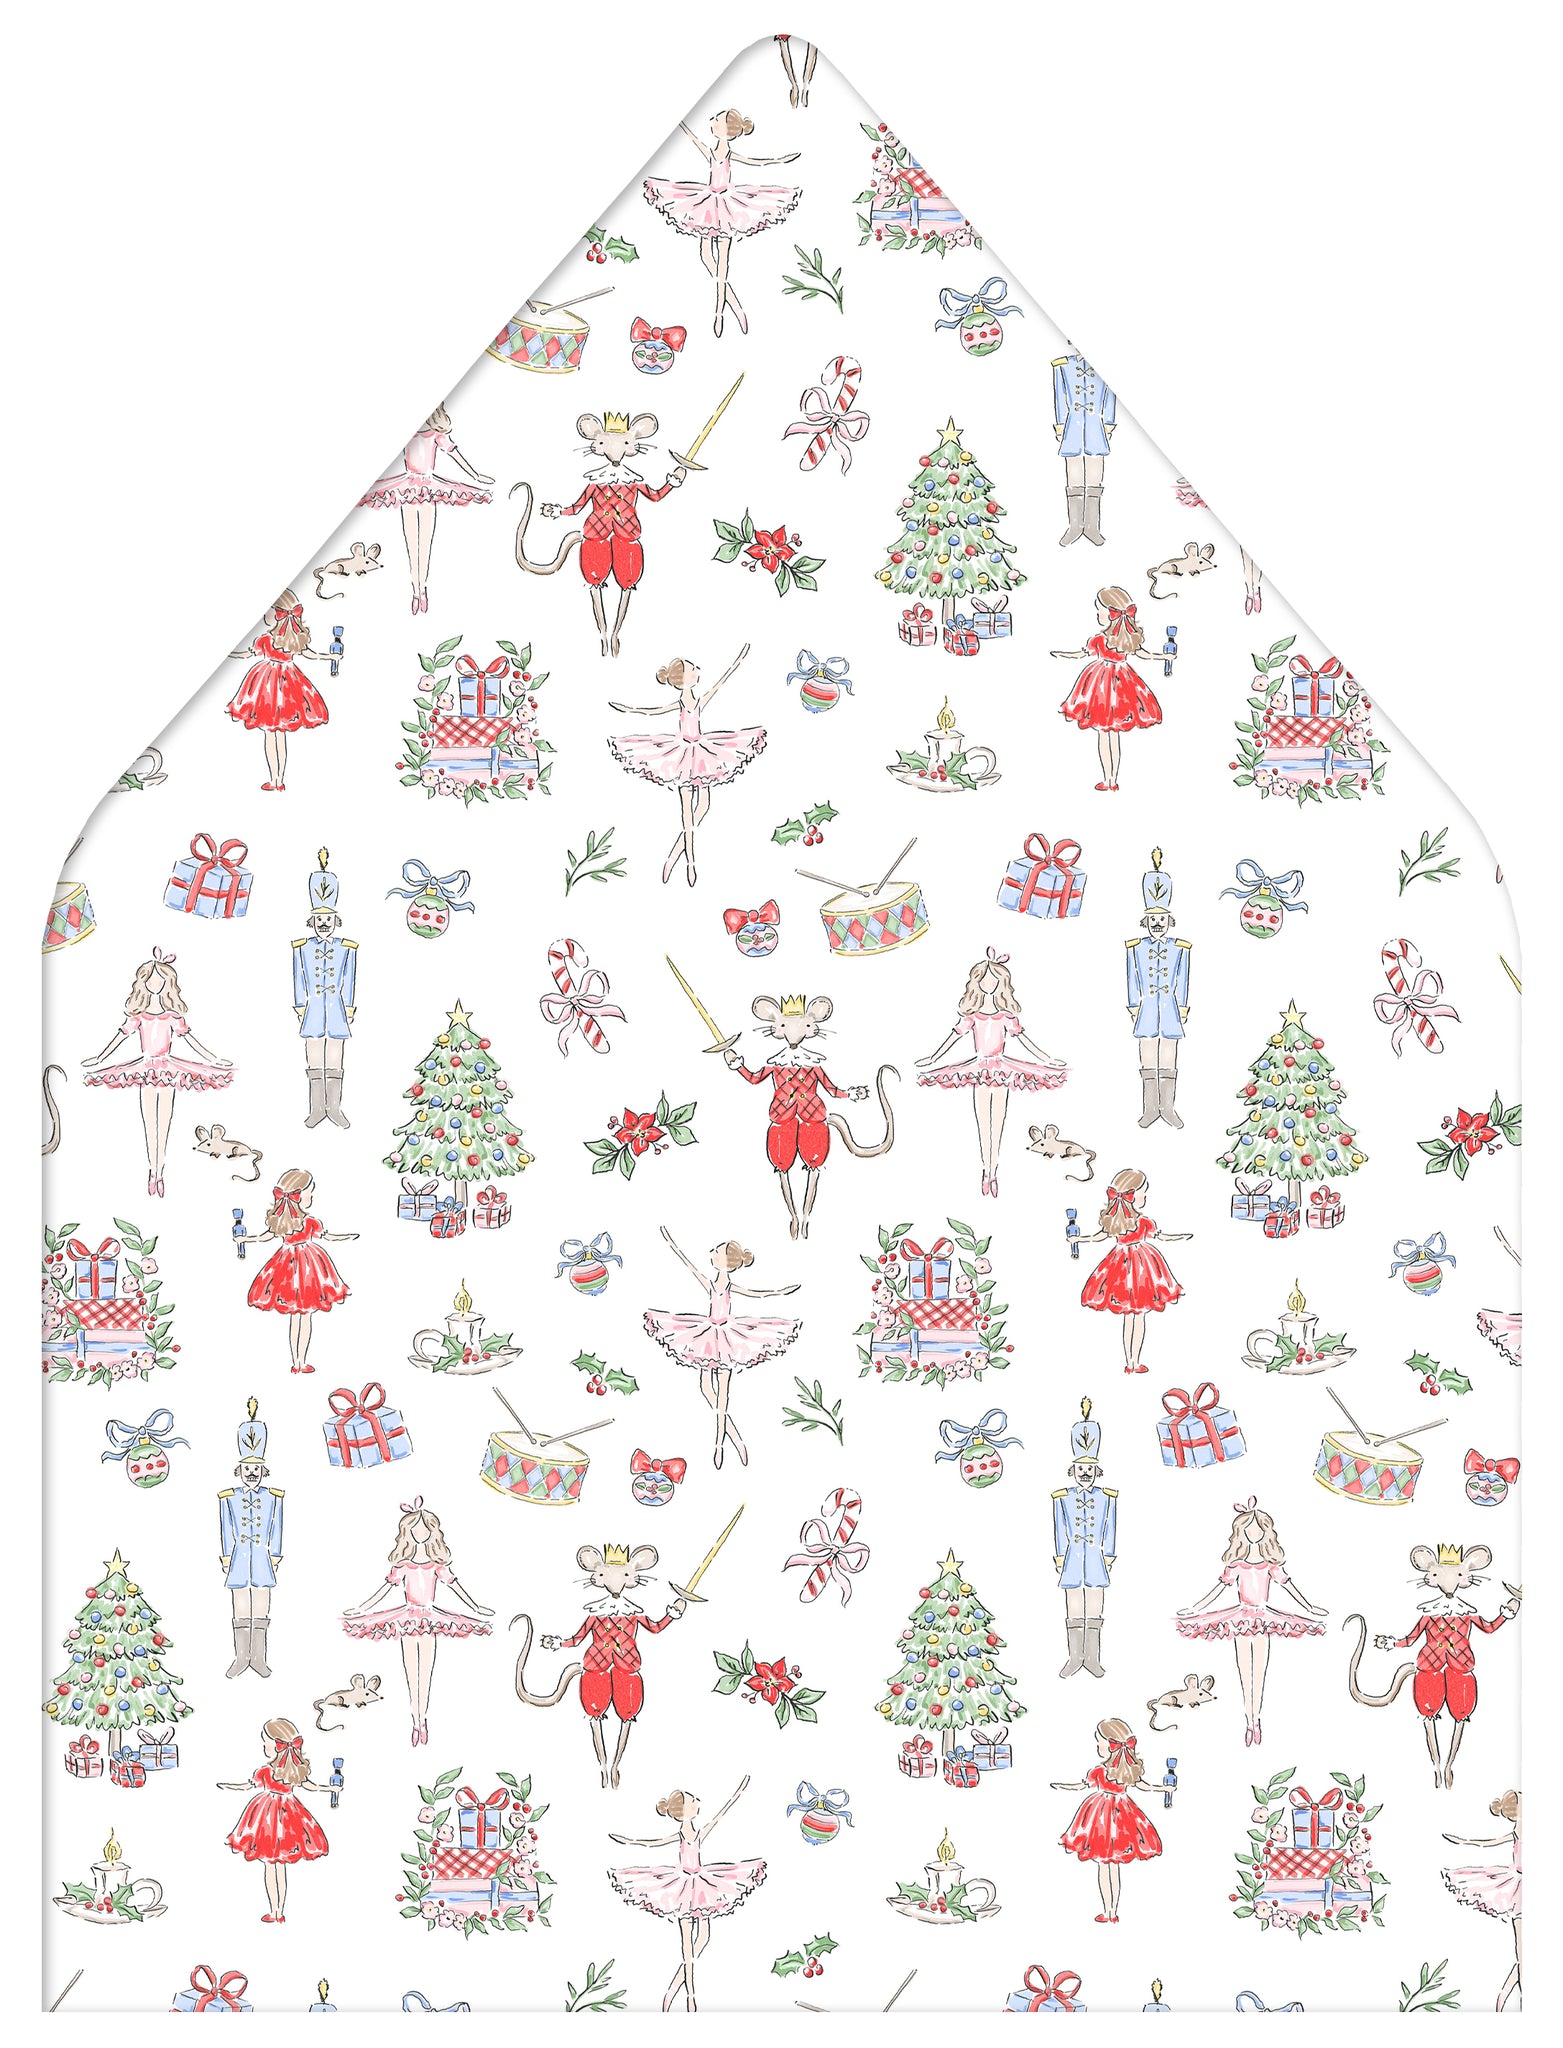 The Nutcracker Holiday Photo Card Envelope Liner Add-On